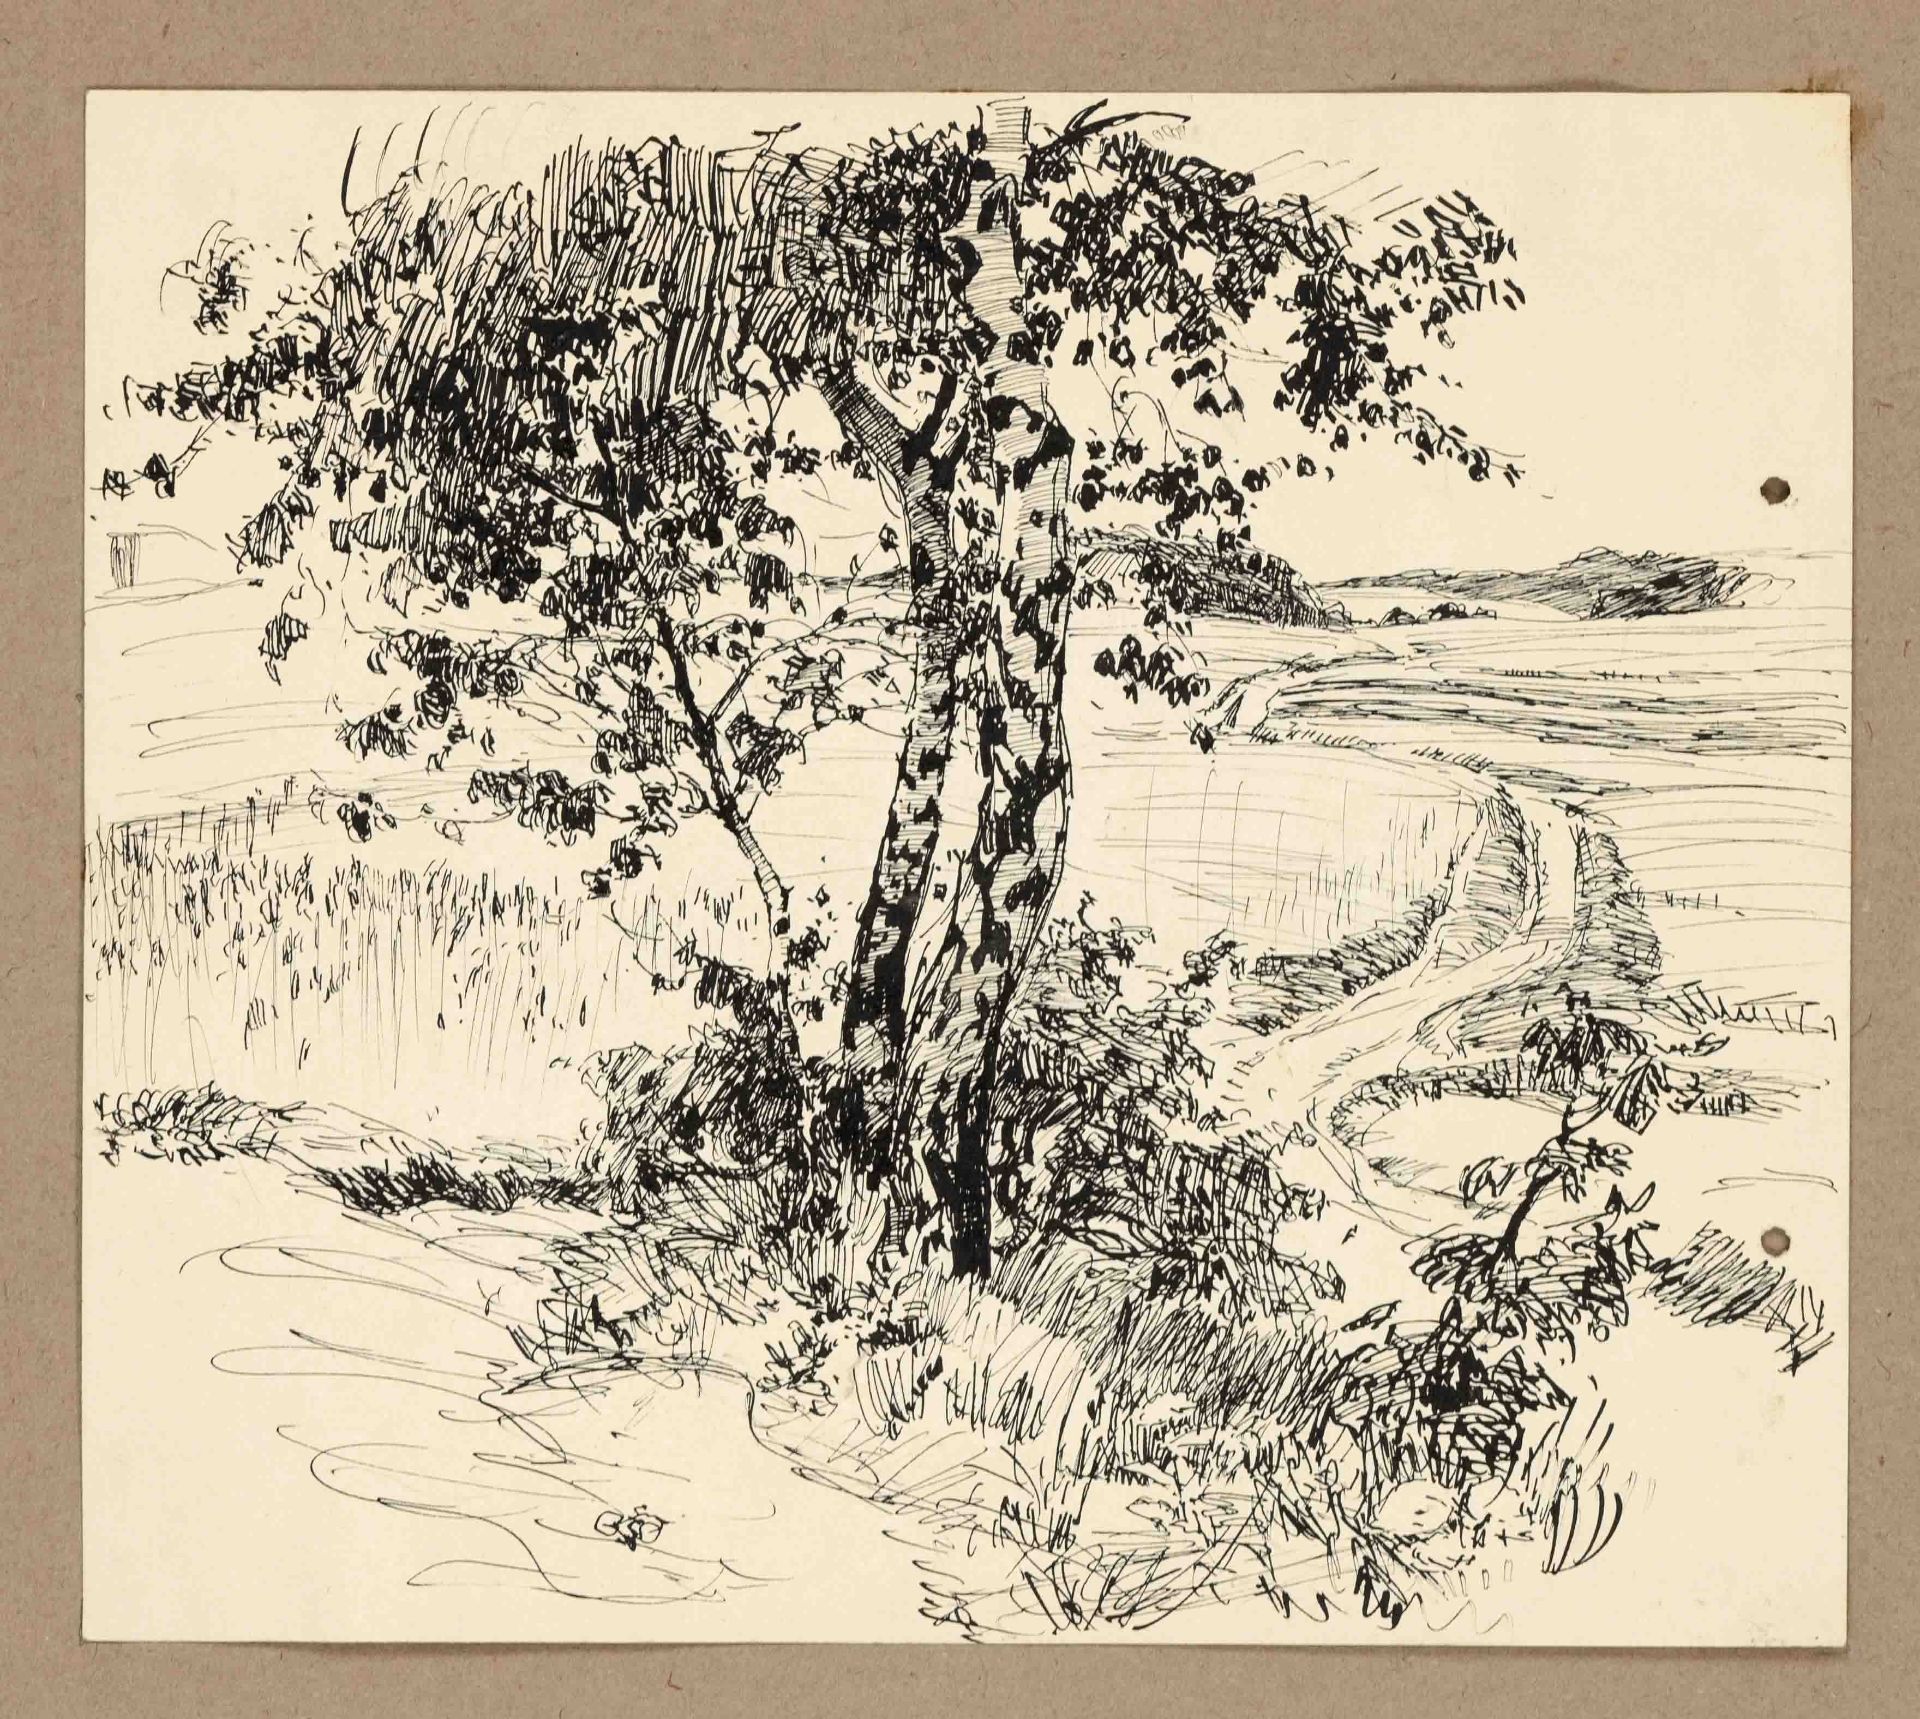 Hans Seydel (1866-1916), 10 drawings by the German architectural and landscape painter from Karschau - Image 3 of 3